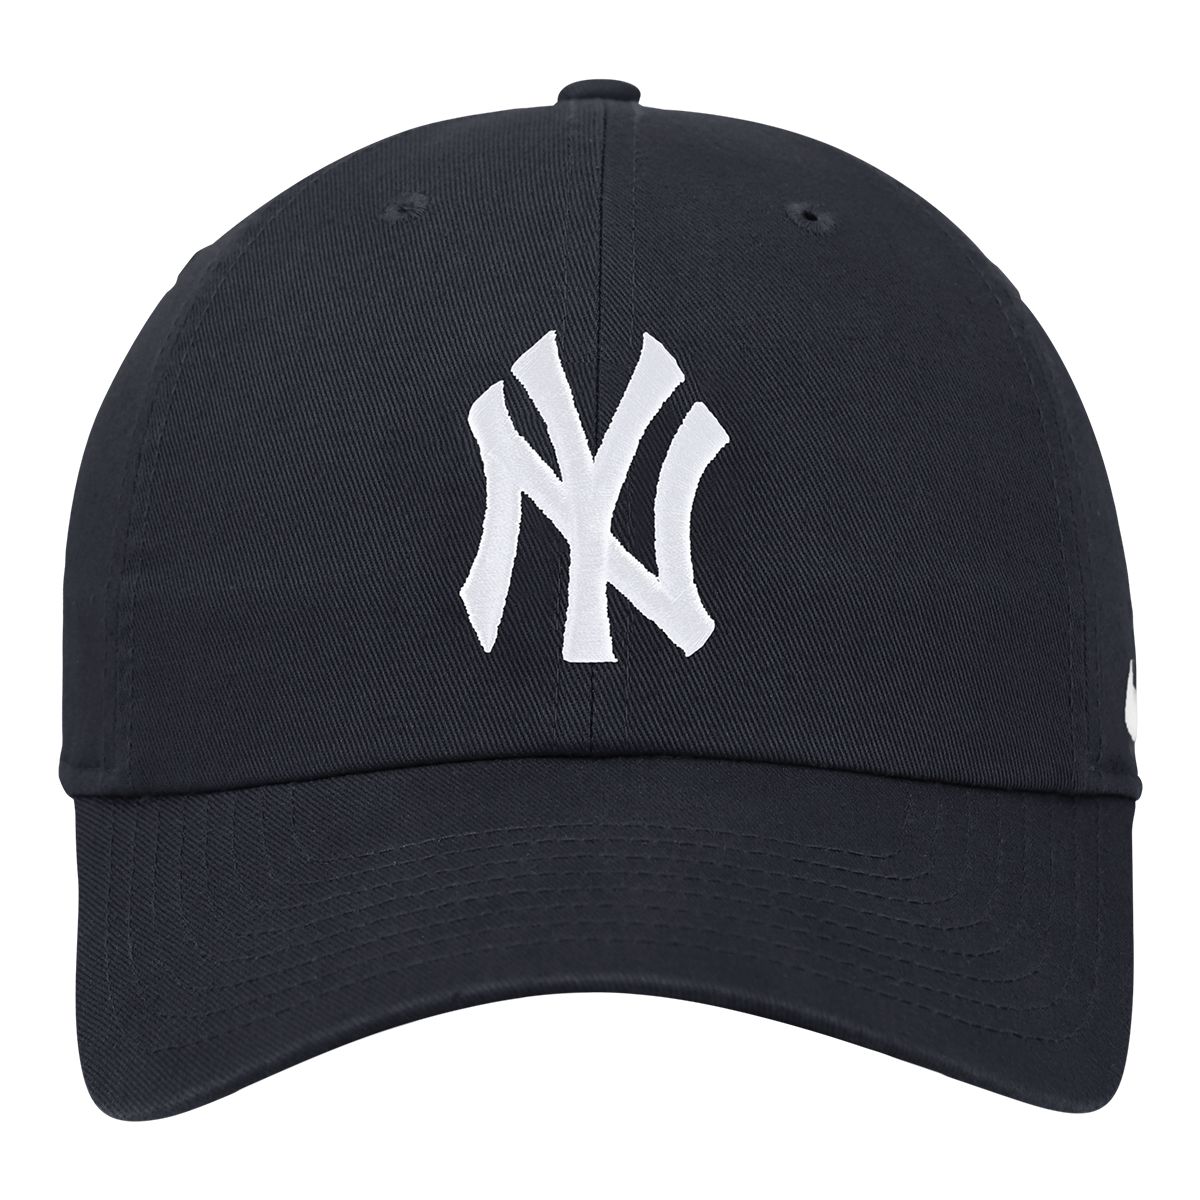 New York Yankees Nike Heritage86 Current Unstruct Cotton Twill Cap